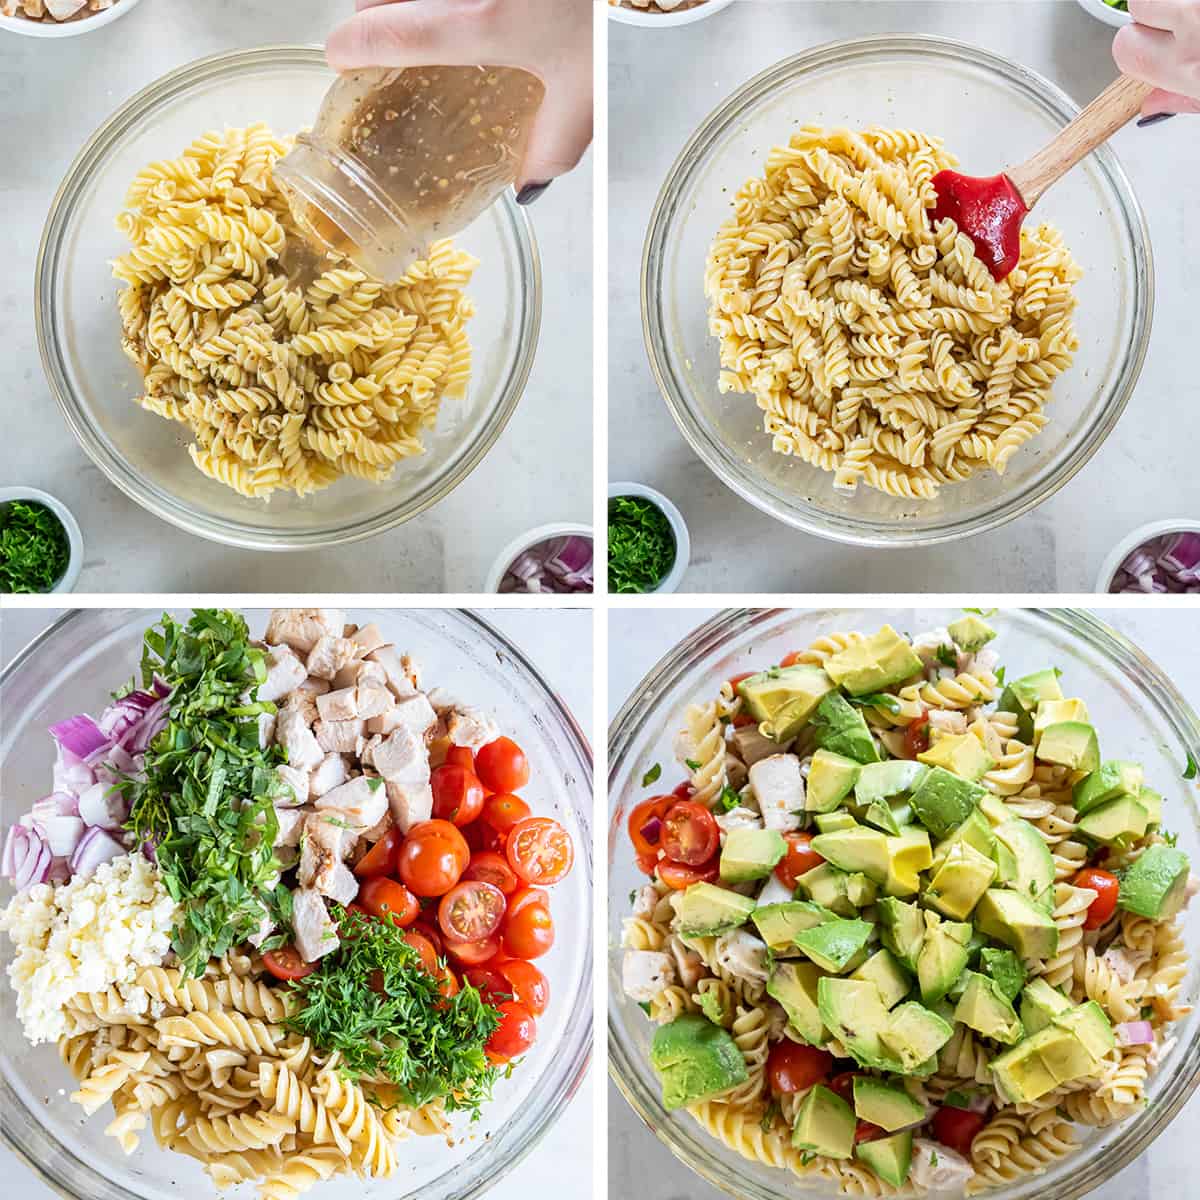 Rotini pasta is combined with chicken, tomatoes, and other ingredients in a bowl and topped with avocado.